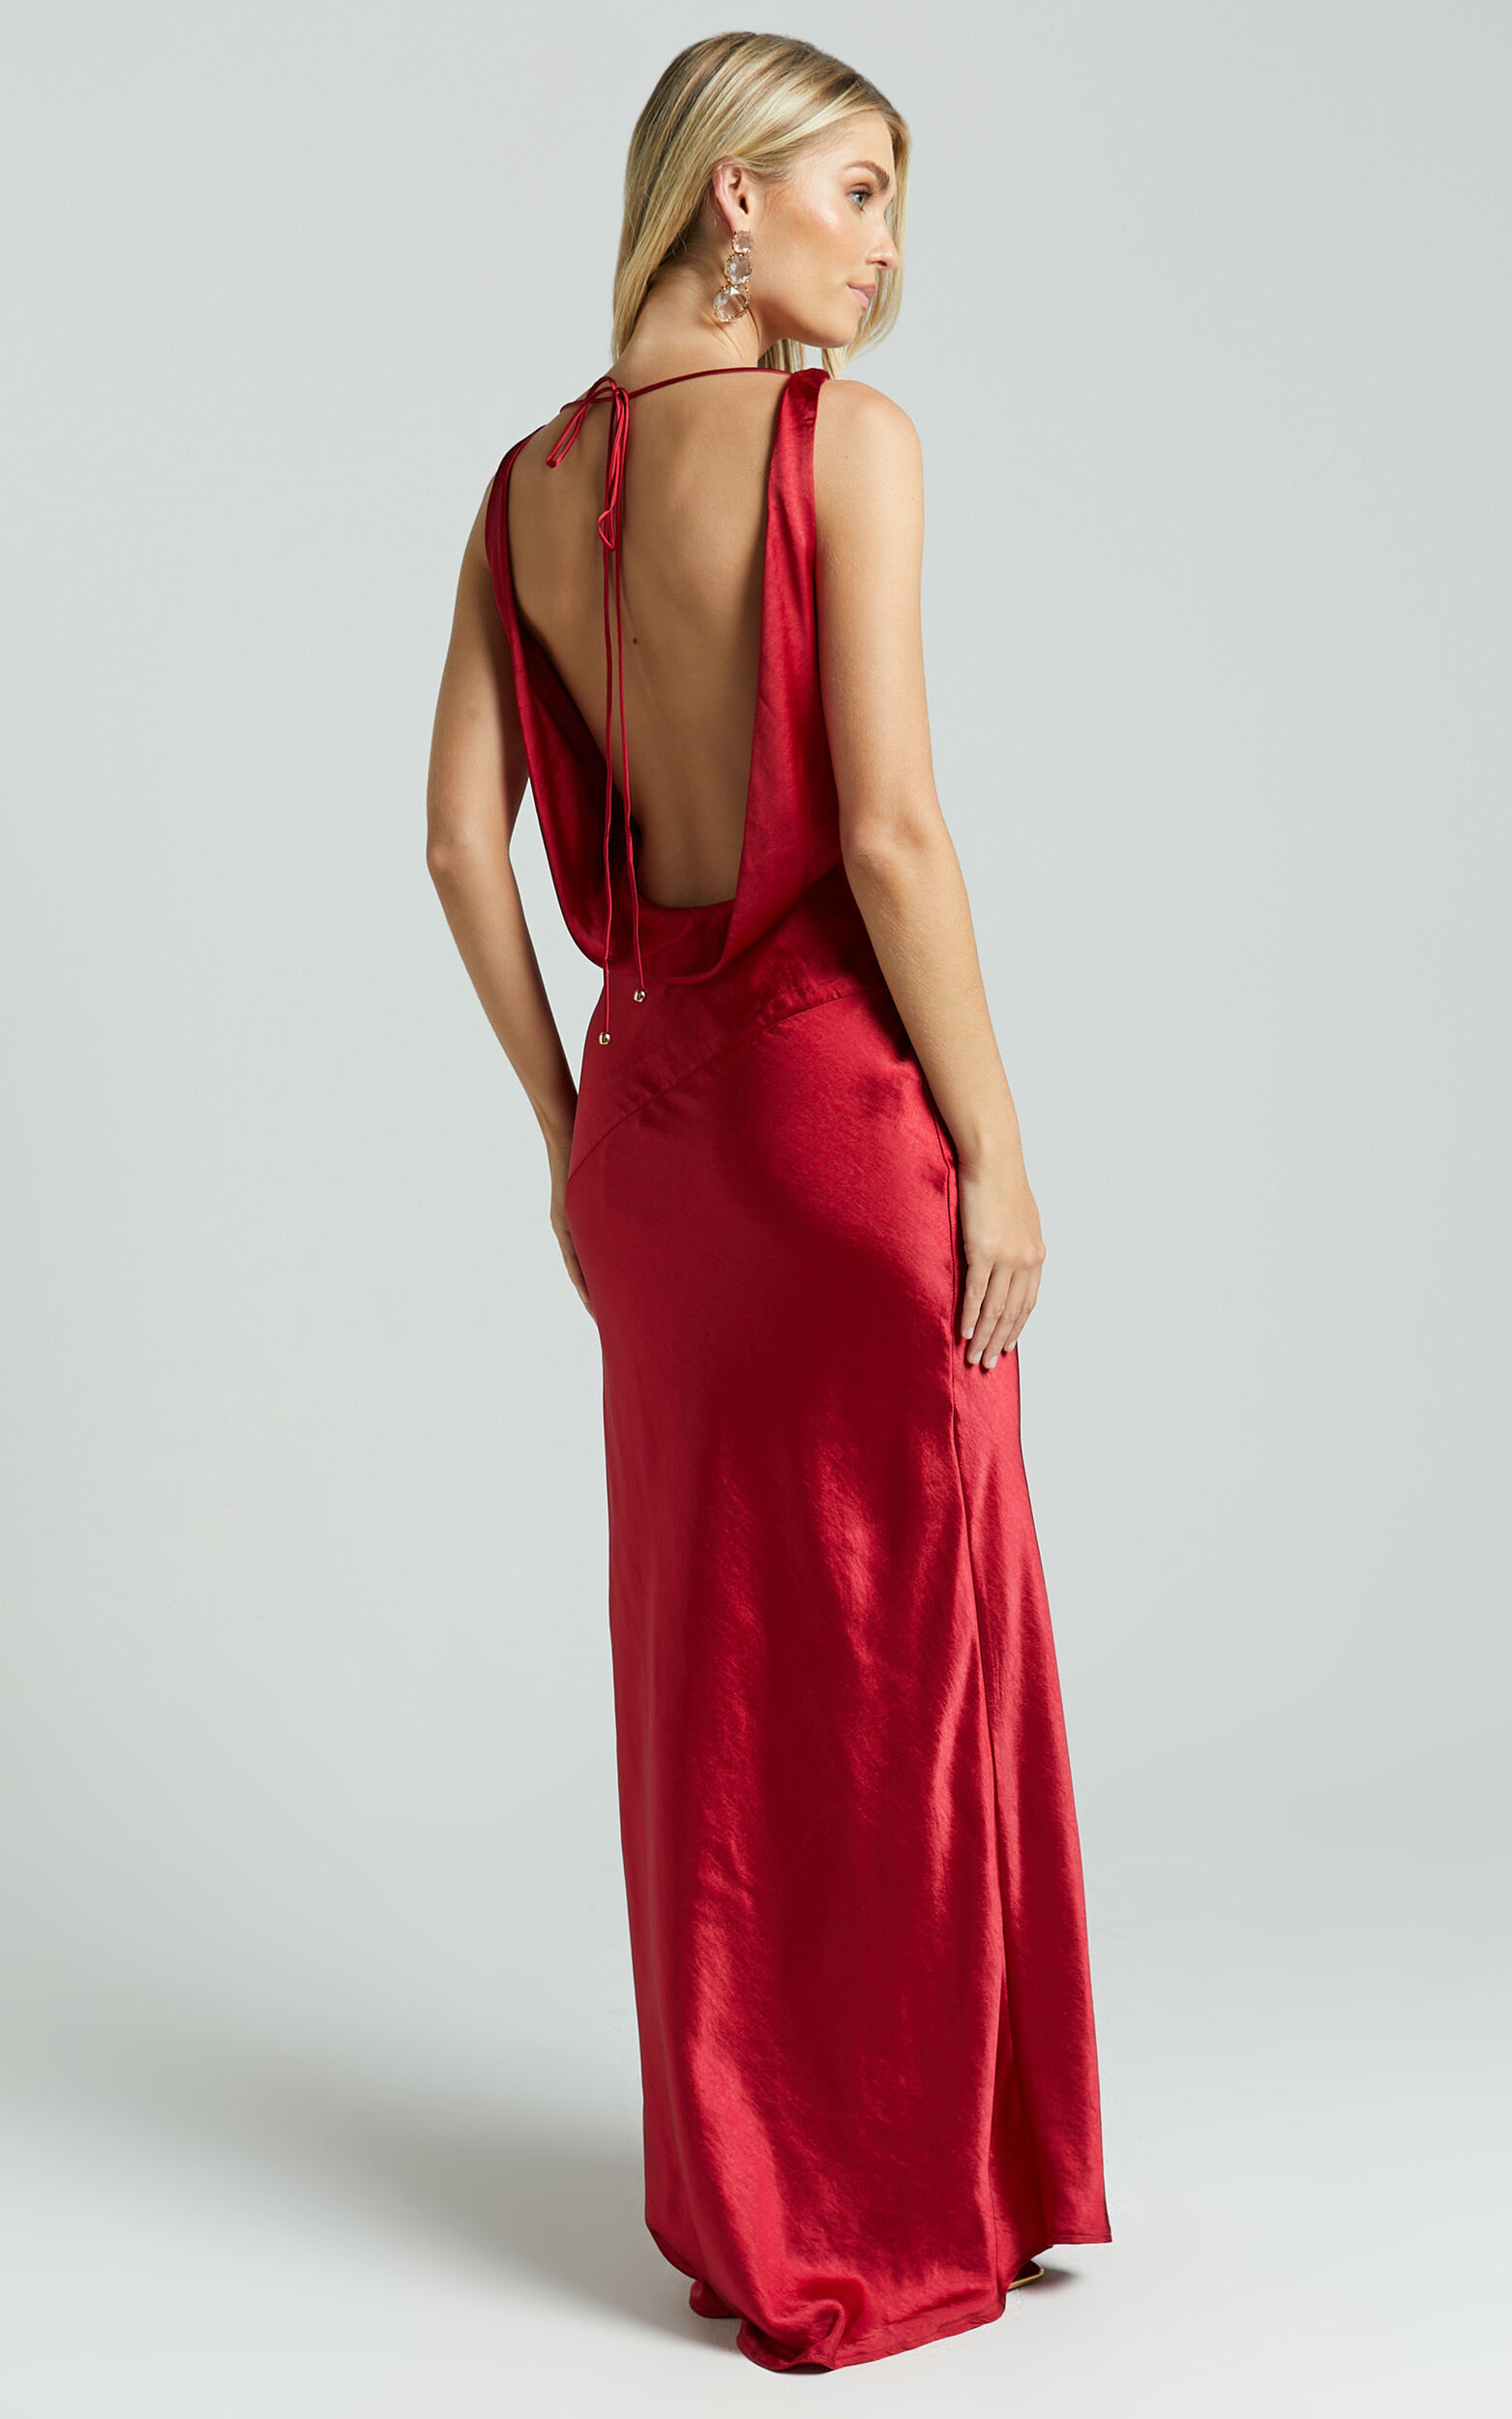 Simple White Evening Gown Cowl Neck Evening Dress Red Carpet